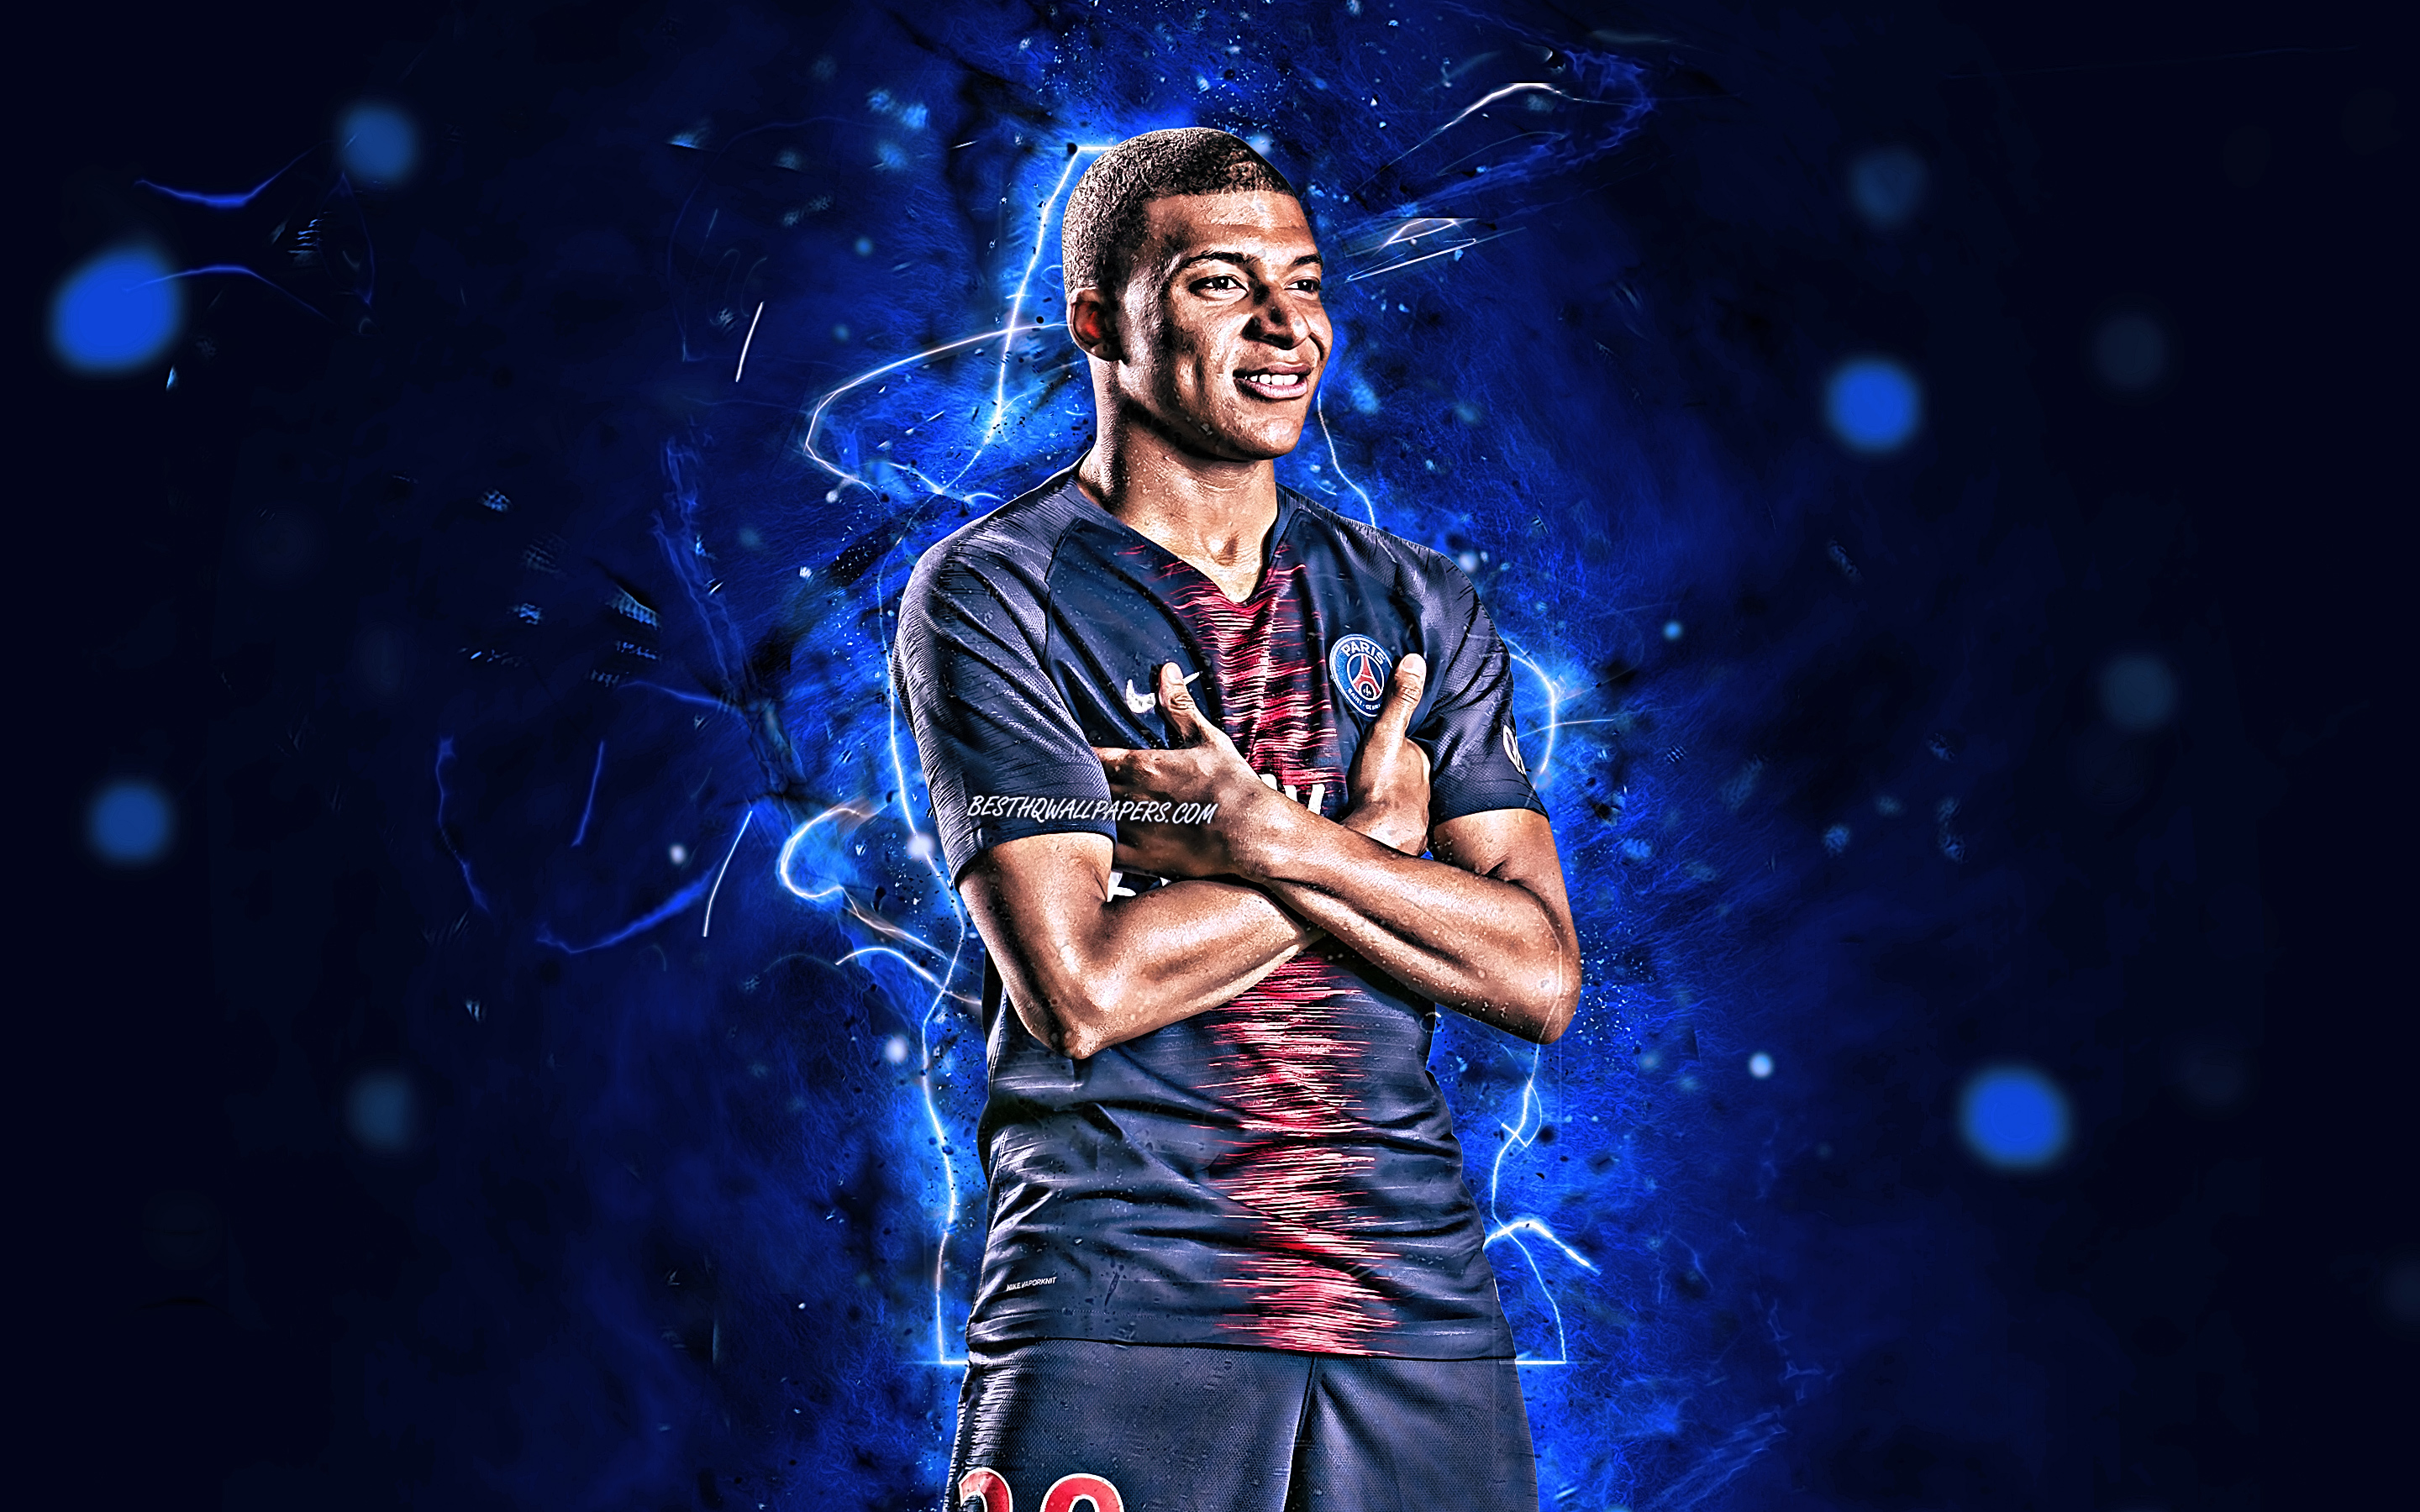 Download Wallpaper Kylian Mbappe, Goal, French Footballers, PSG, Personal Celebration, Ligue Paris Saint Germain, Mbappe, Football Stars, Neon Lights, Soccer For Desktop With Resolution 2880x1800. High Quality HD Picture Wallpaper